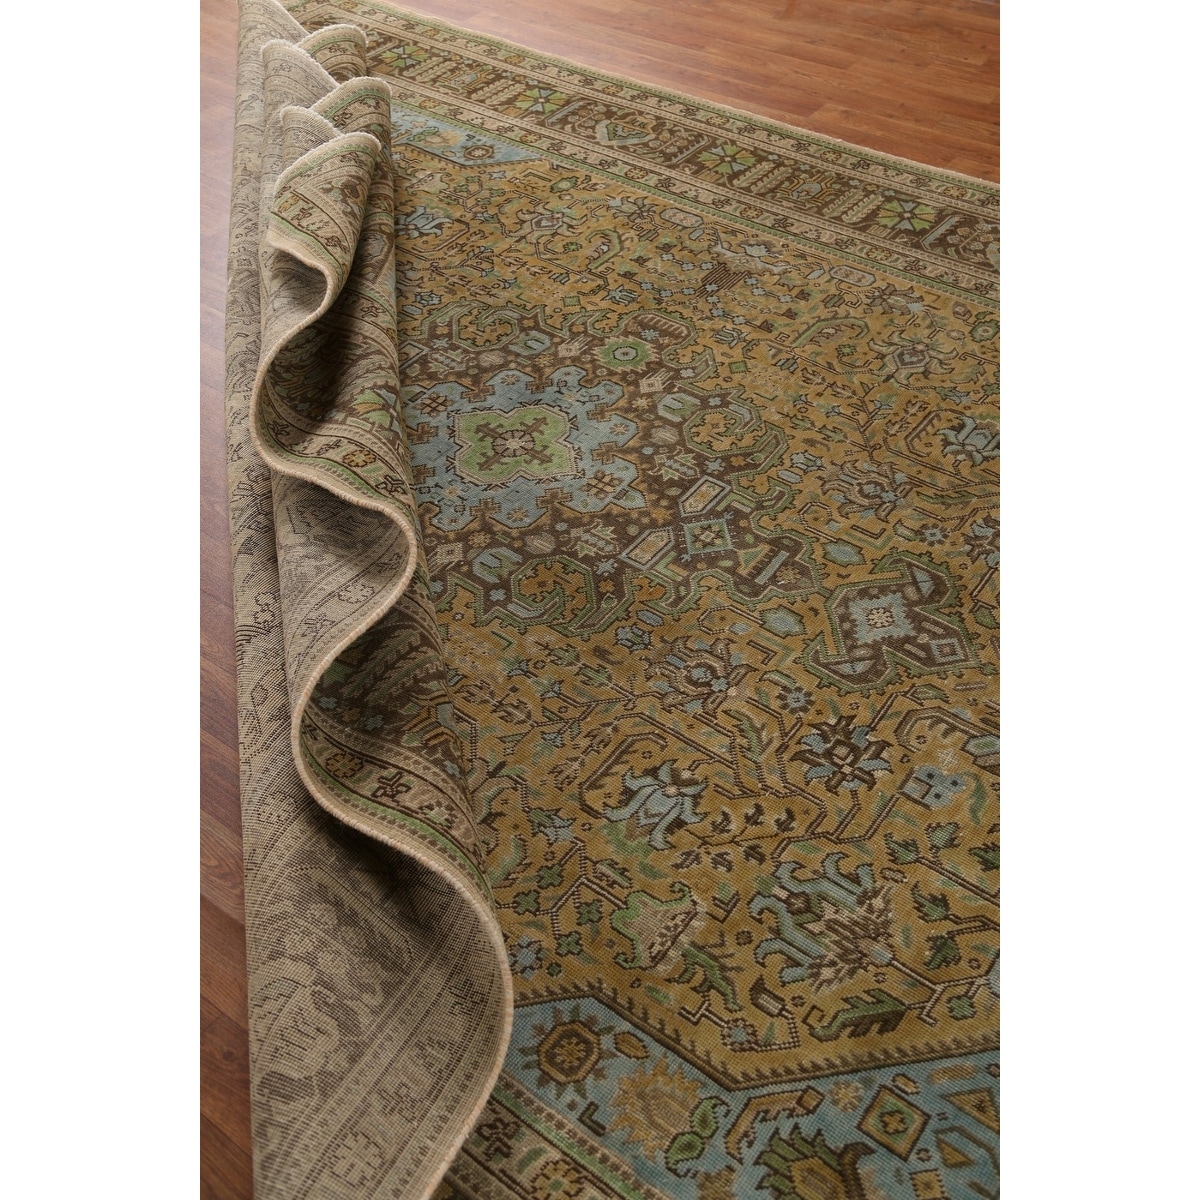 https://ak1.ostkcdn.com/images/products/is/images/direct/3e76c73058ecbbb7ac0a73768bc0d168aa04de37/Vintage-Over-dyed-Tabriz-Persian-Area-Rug-Hand-knotted-Wool-Carpet.jpg